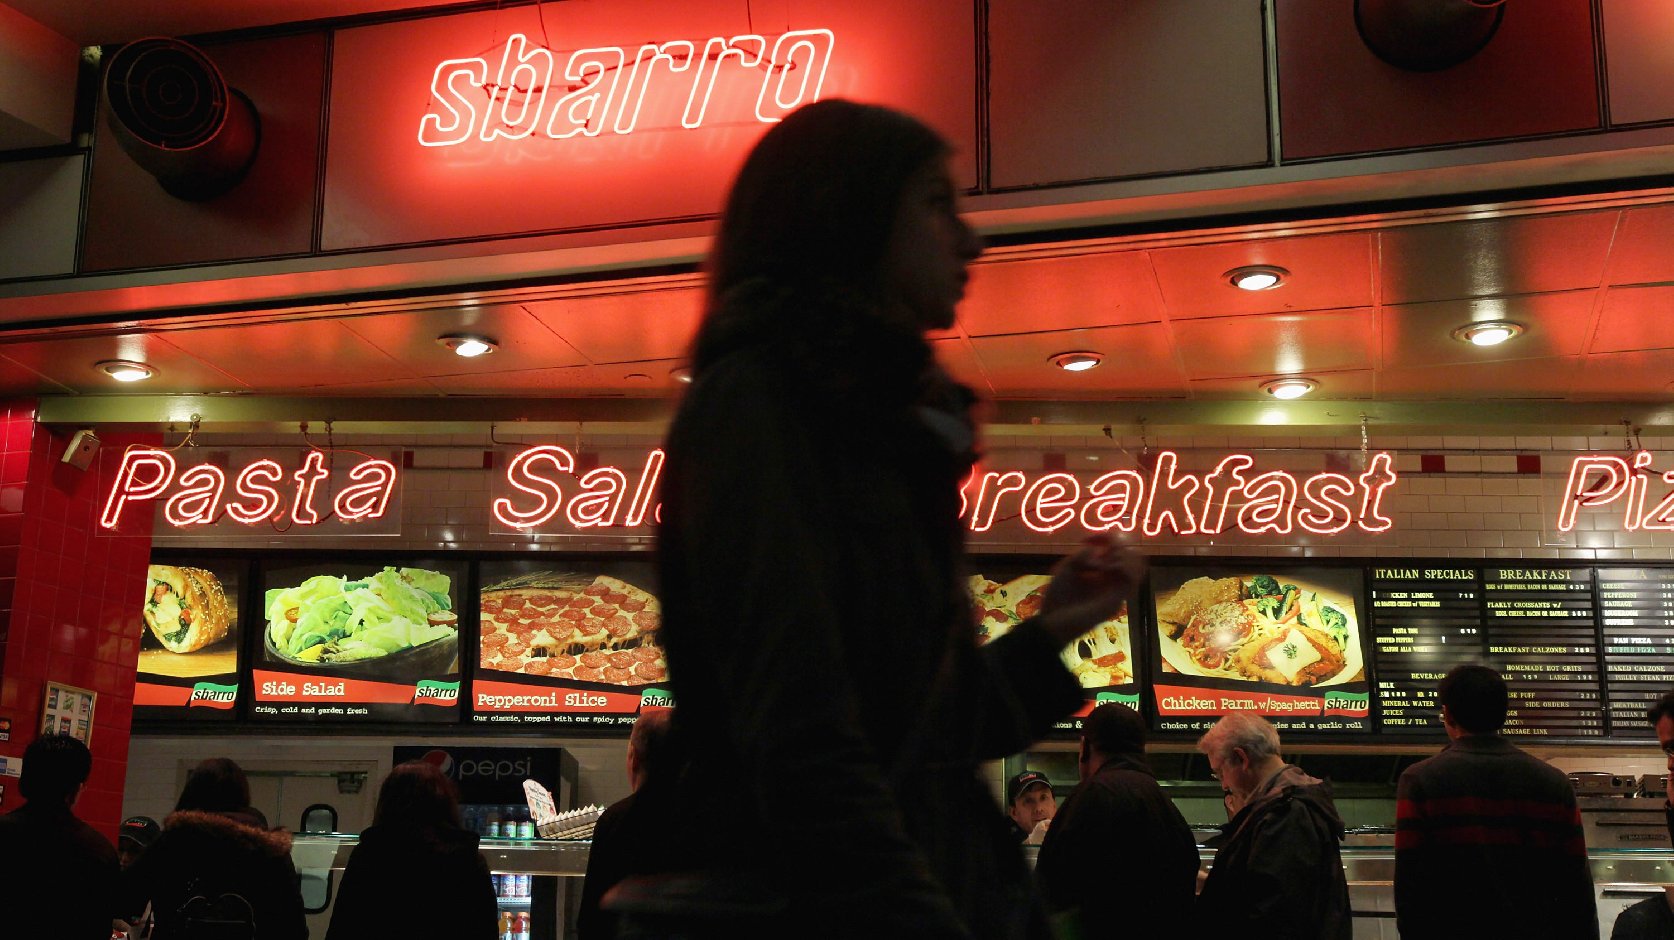 Customers at Sbarro in Chicago on April 4, 2011, the day that the company filed for Chapter 11 bankruptcy. Photo: Scott Olson/Getty Images